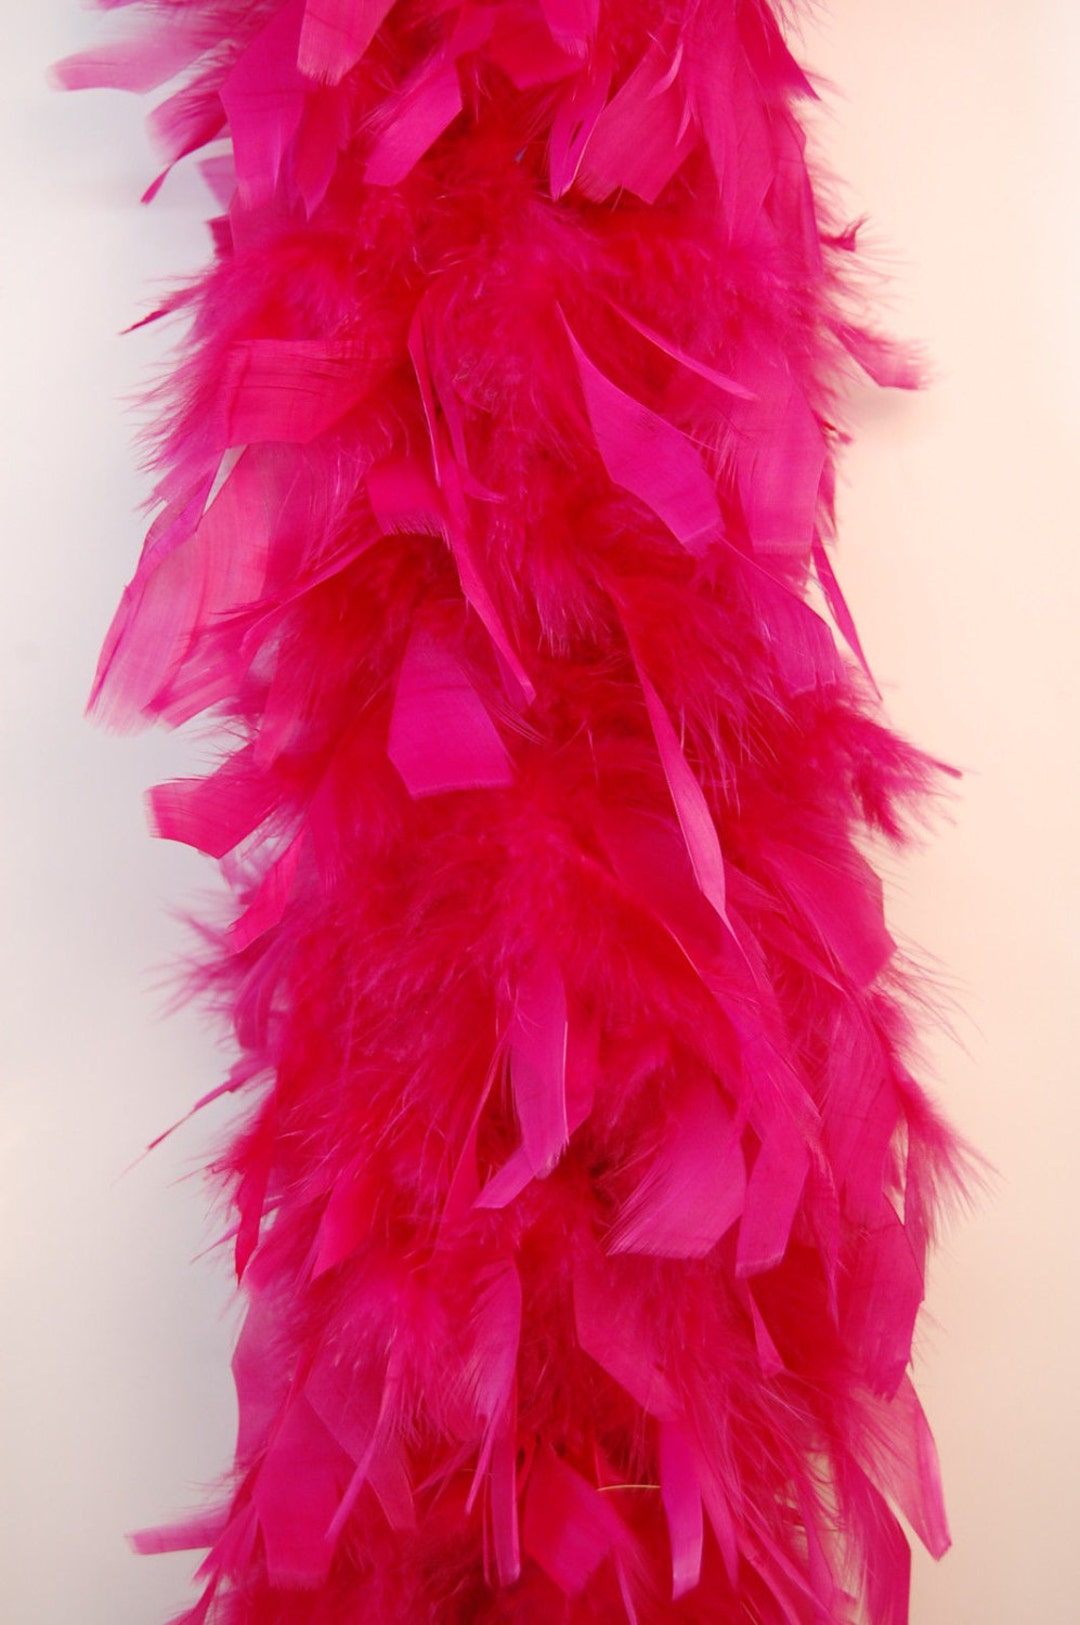 Lightweight White Feather Boa (6', 35 Grams)